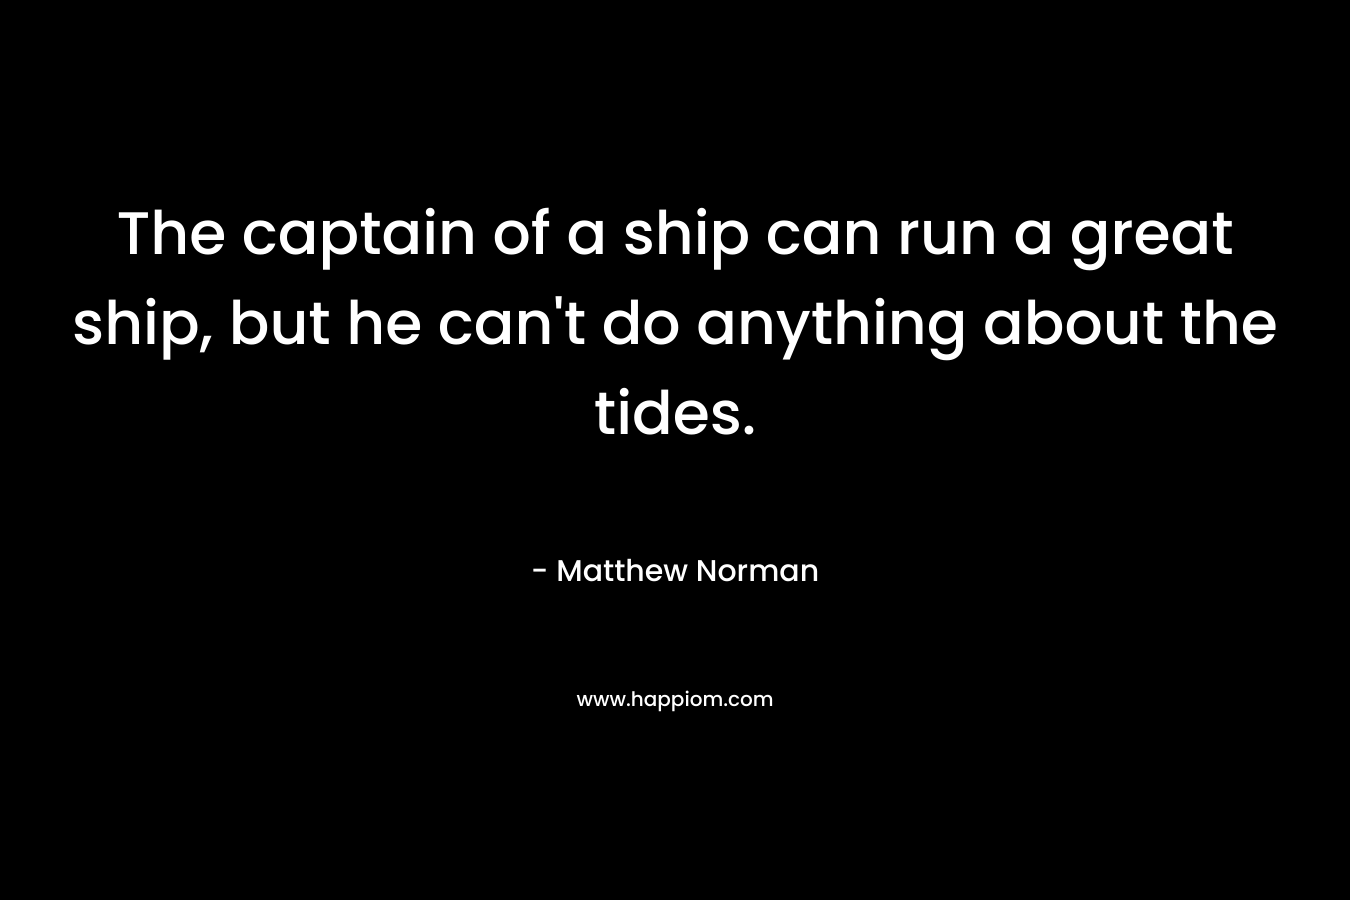 The captain of a ship can run a great ship, but he can’t do anything about the tides. – Matthew Norman